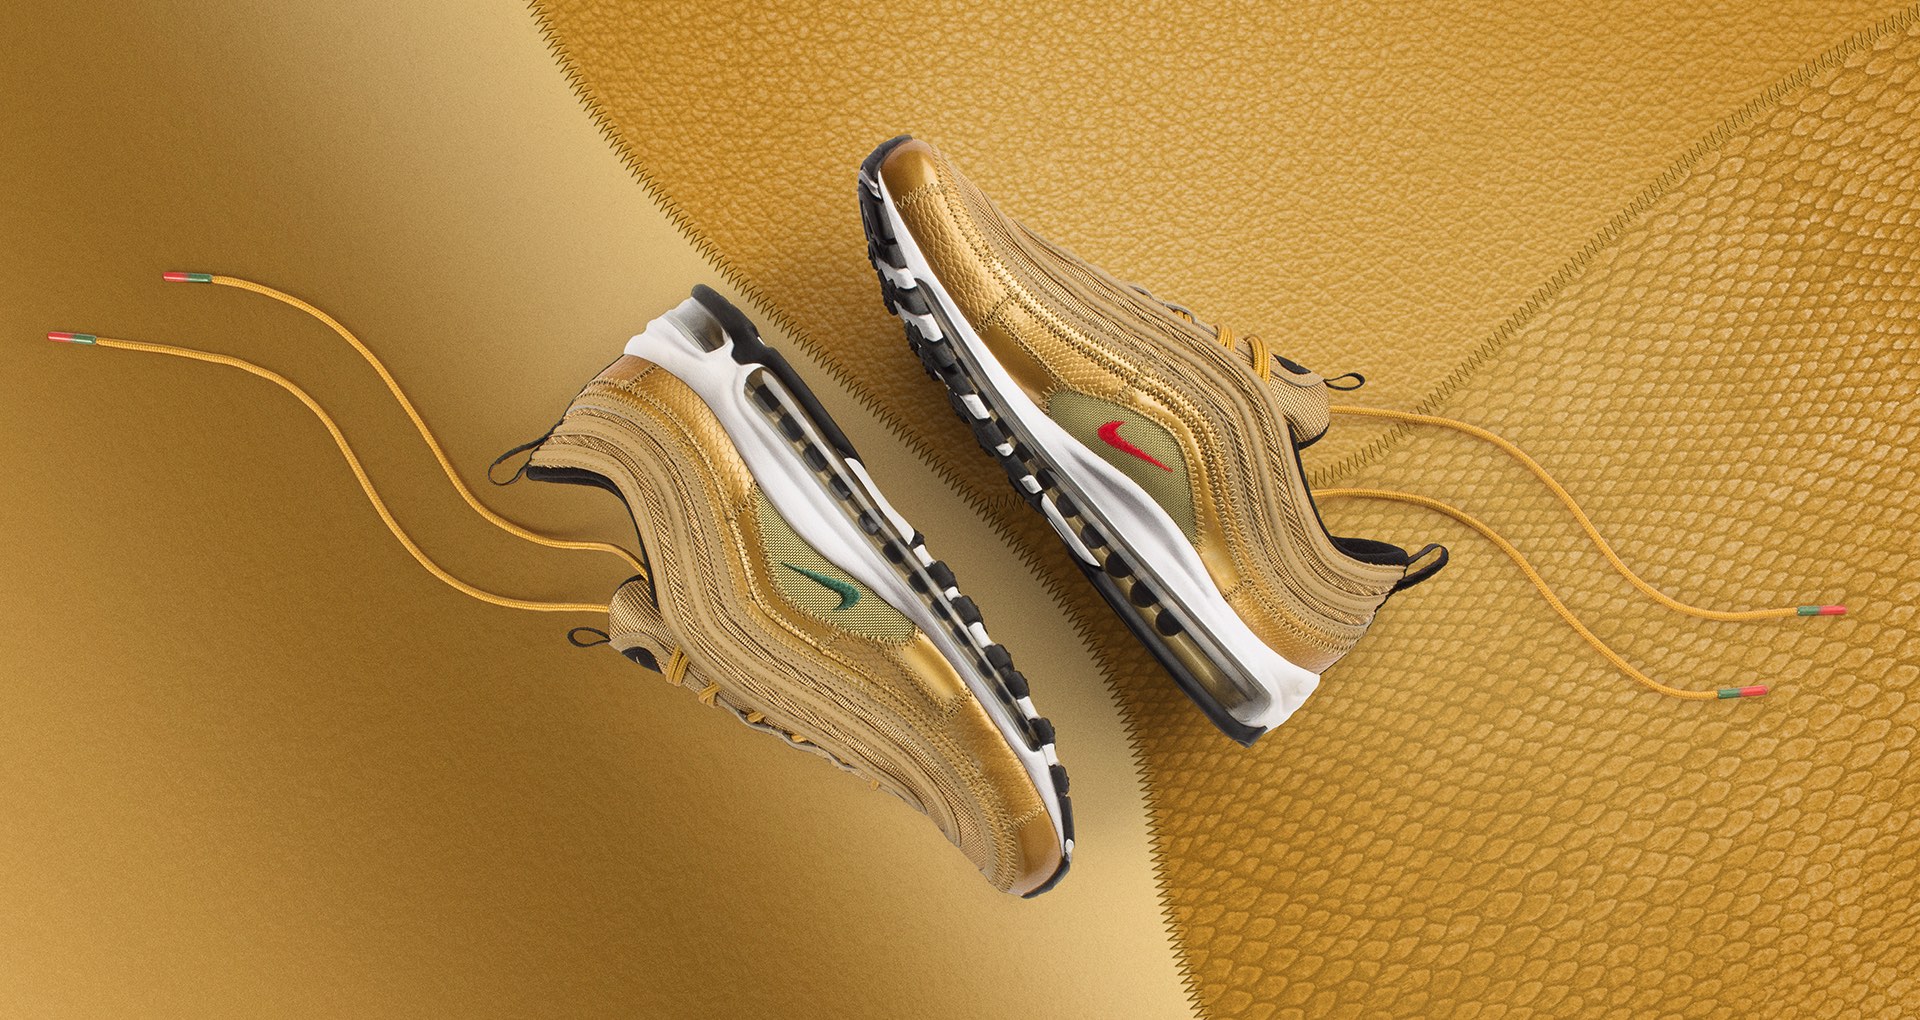 Nike Air Max 97 CR7
« Golden Patchwork »